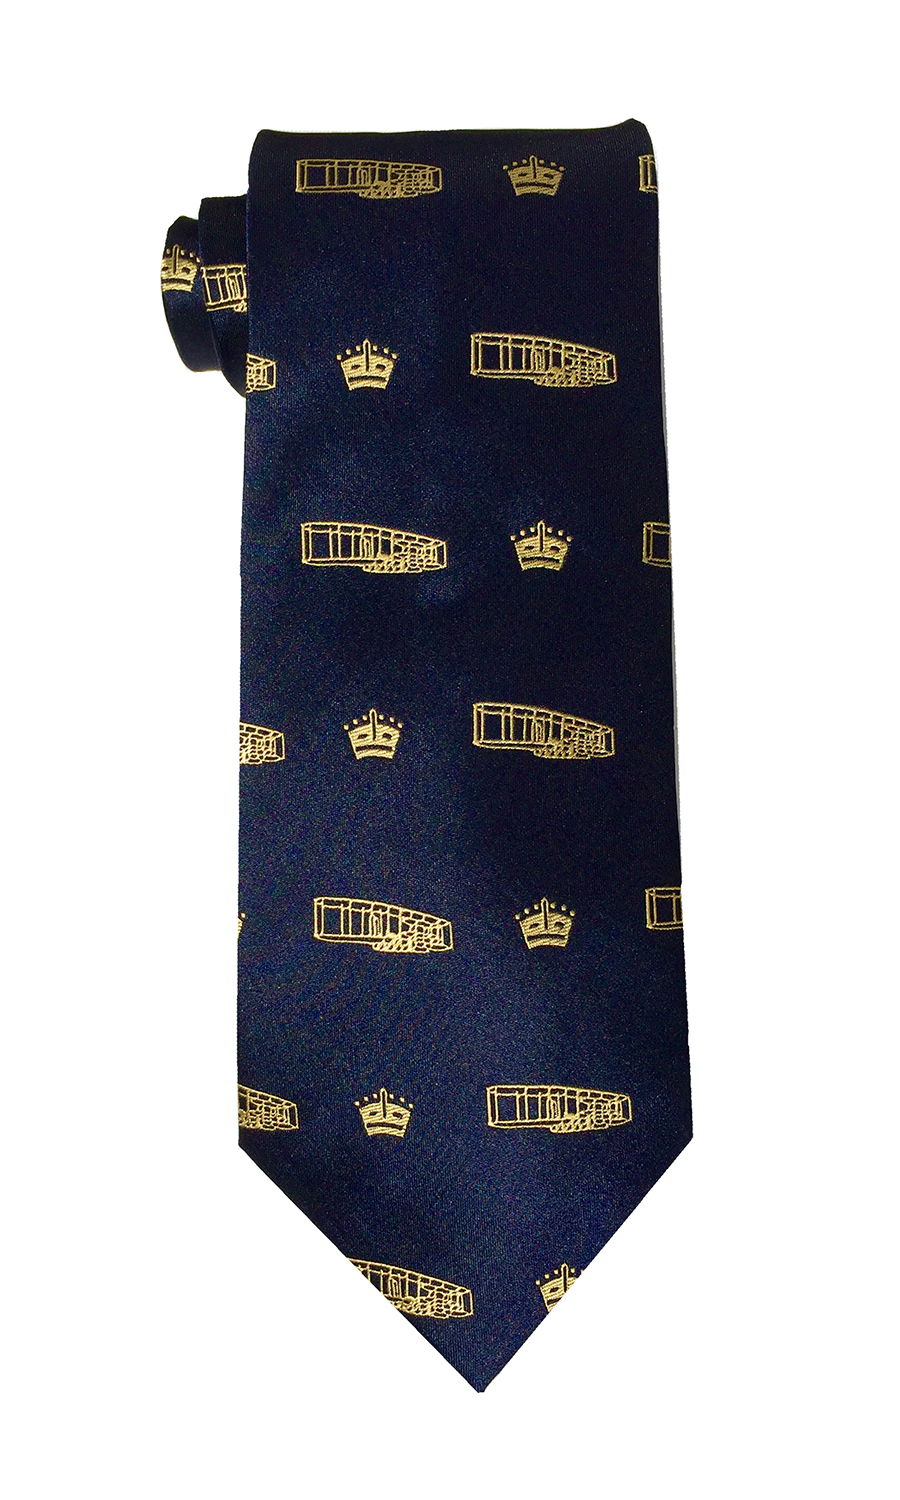 Wright Flyer airplane tie in navy and gold